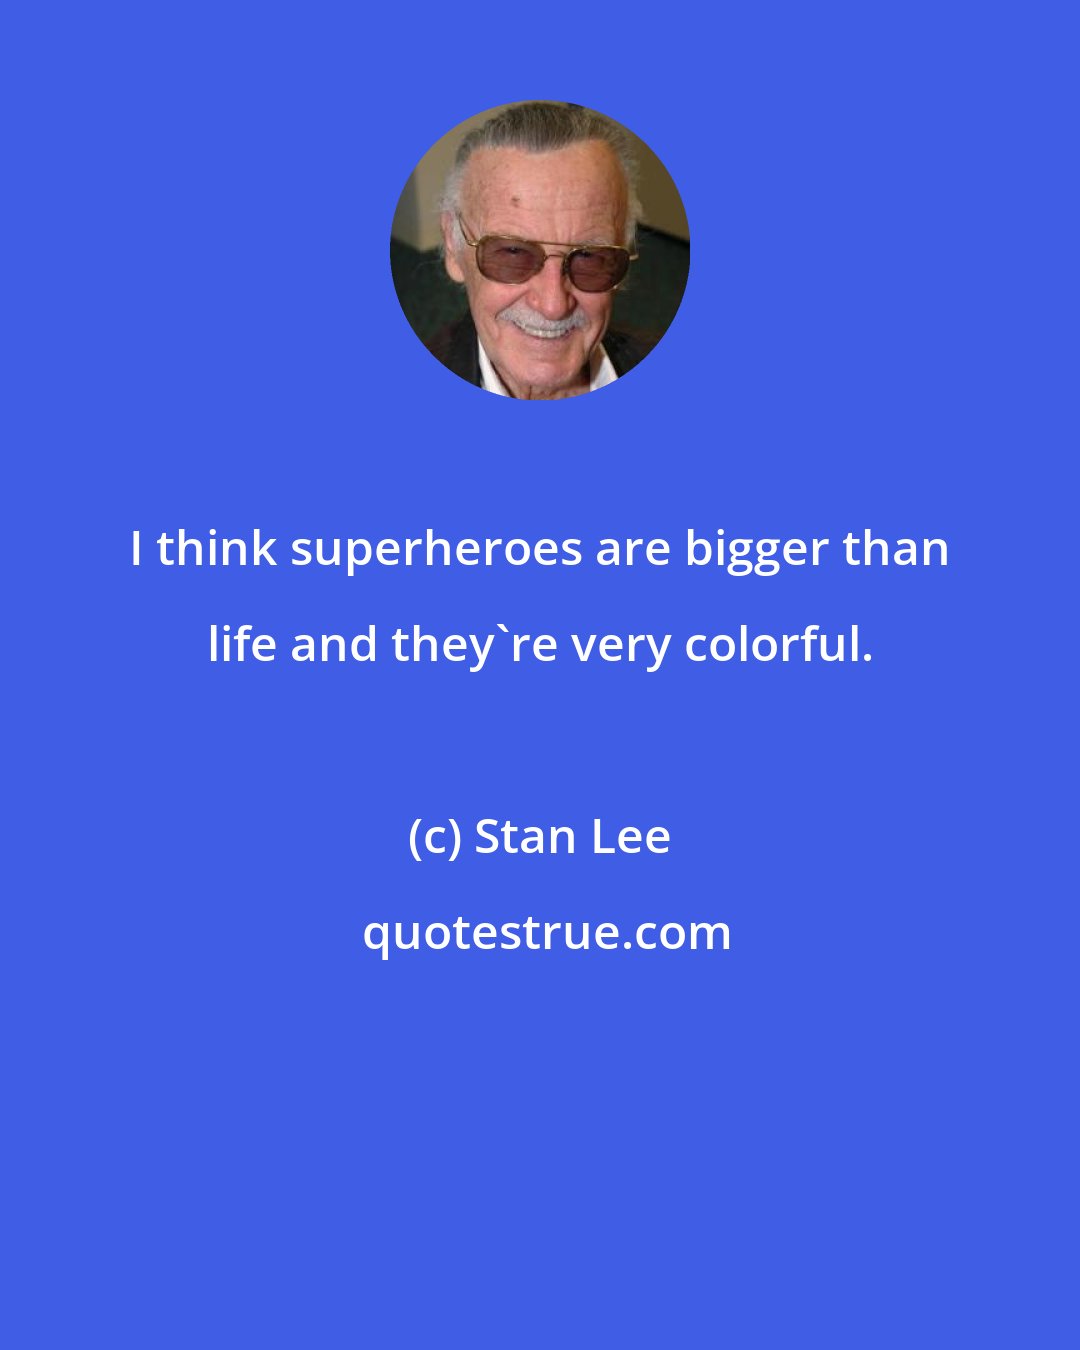 Stan Lee: I think superheroes are bigger than life and they're very colorful.